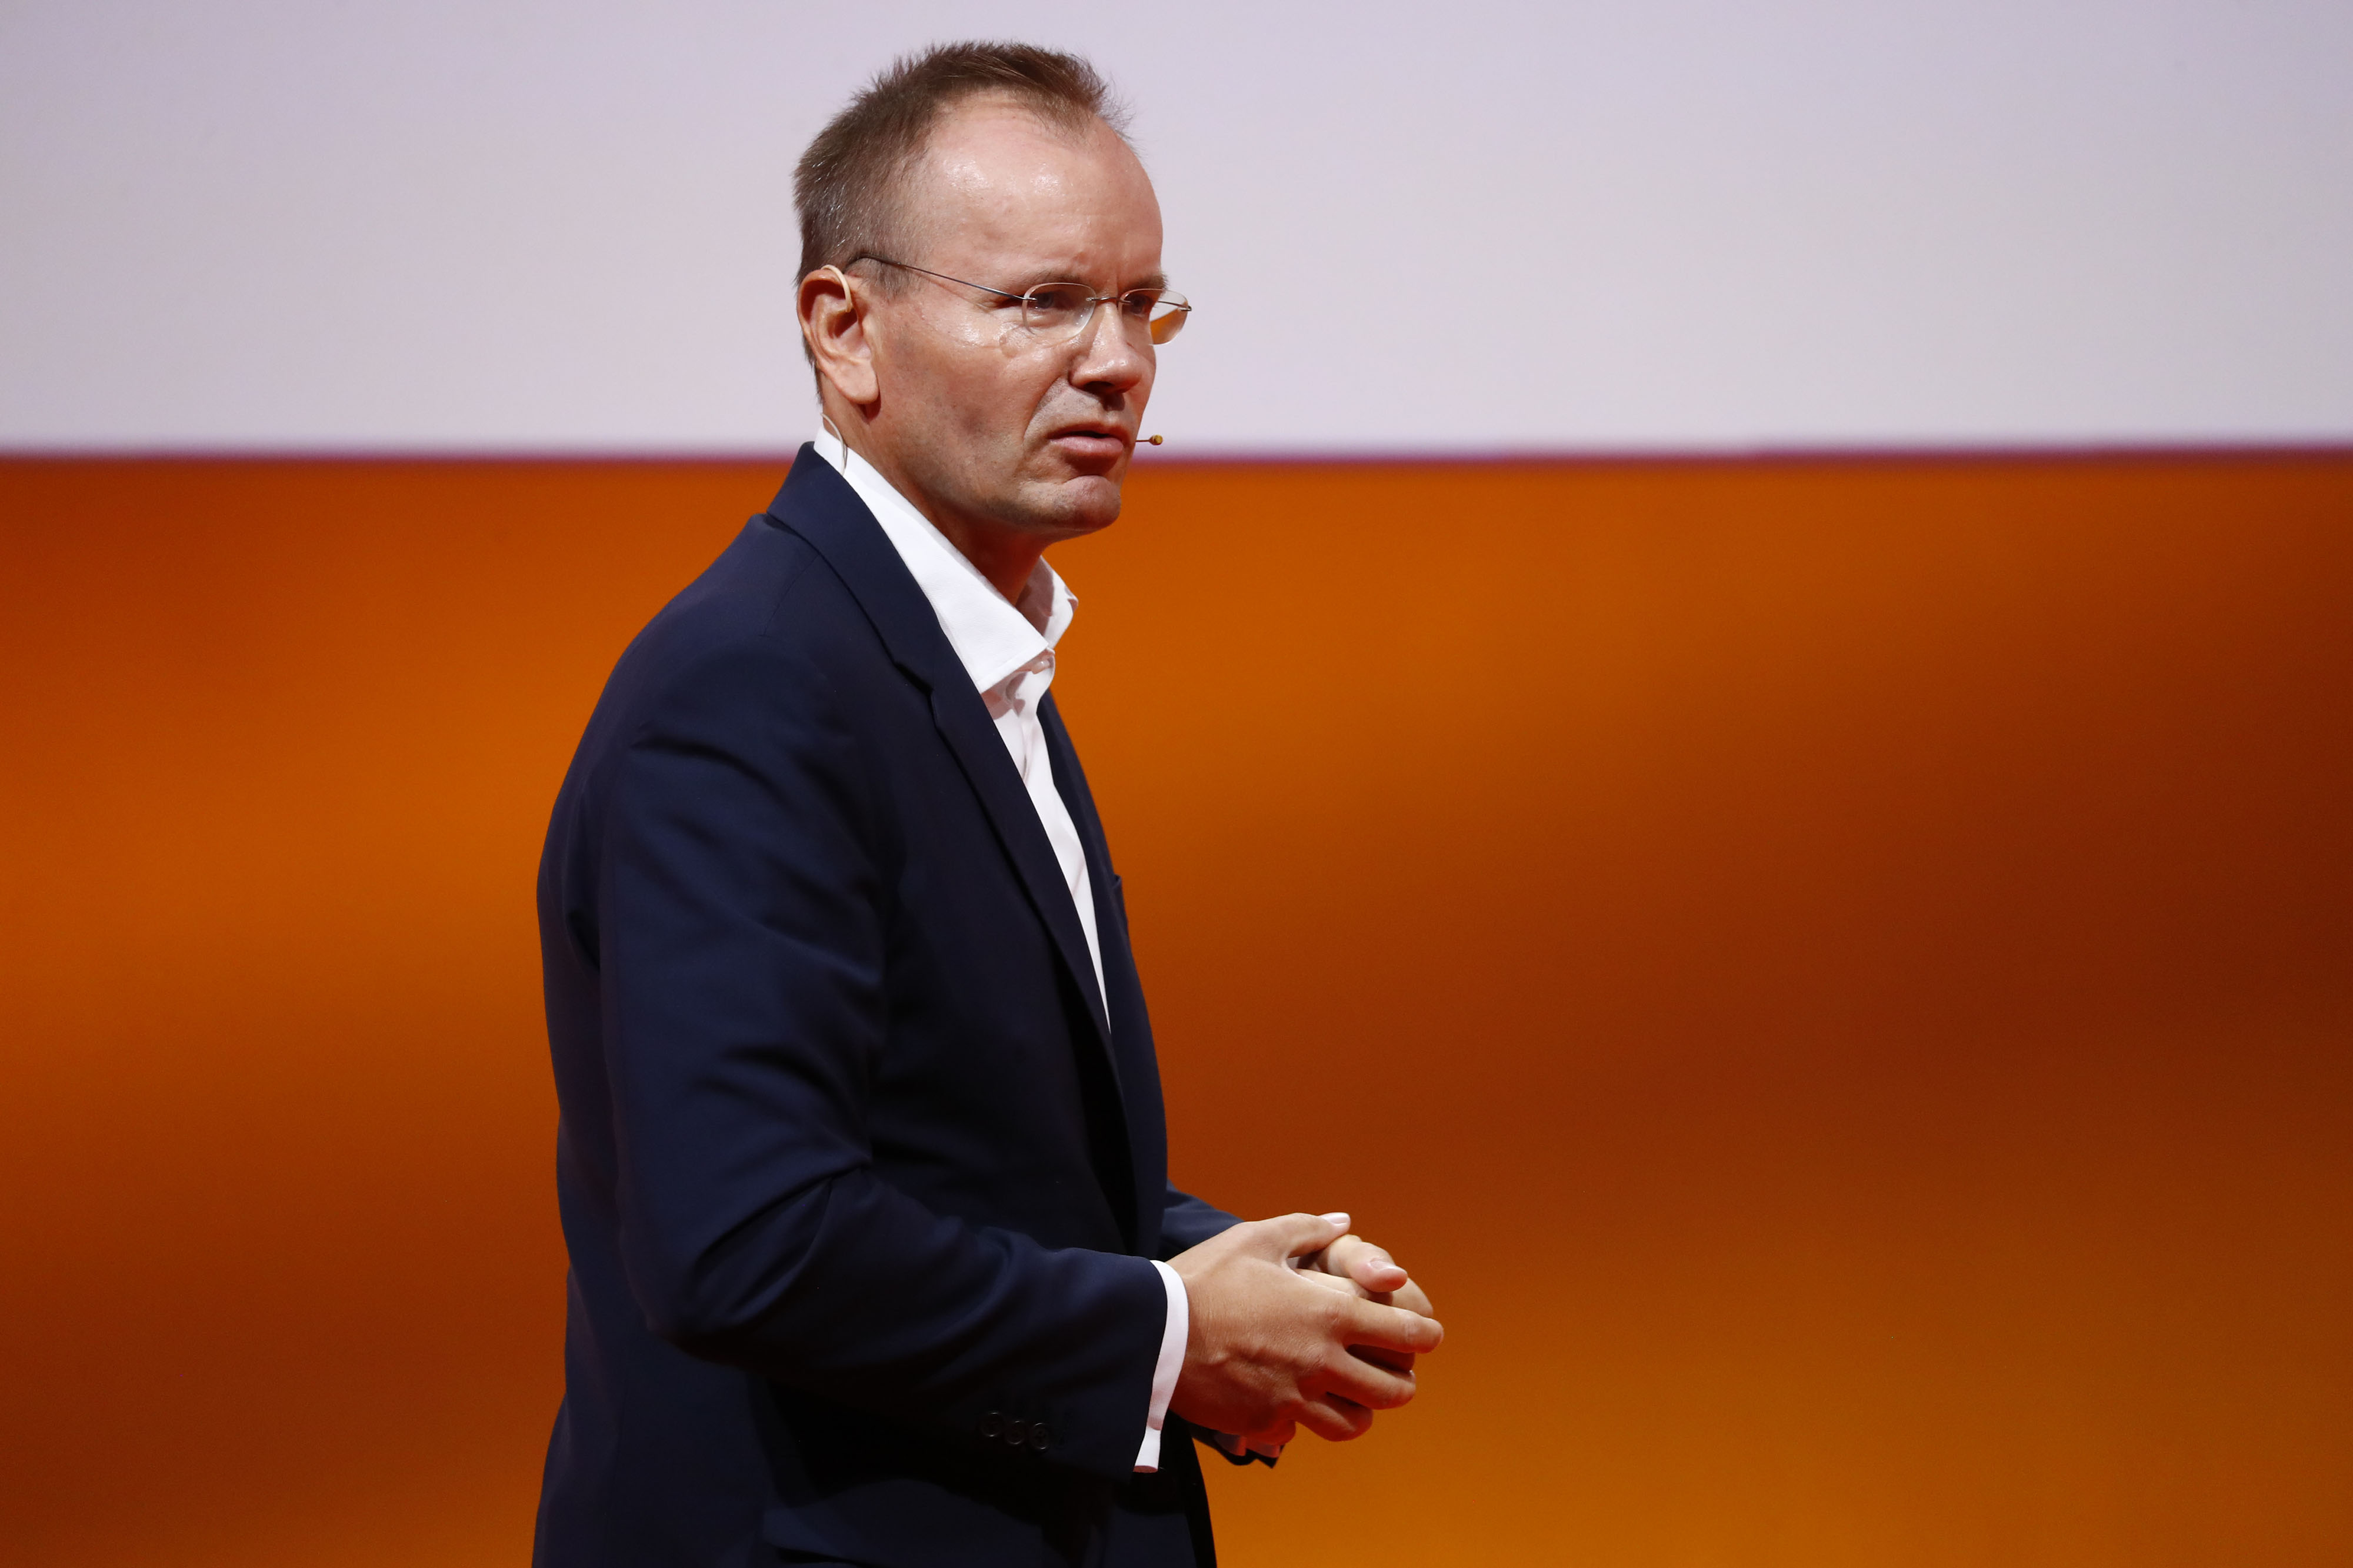 Markus Braun, former chief executive officer of Wirecard AG.